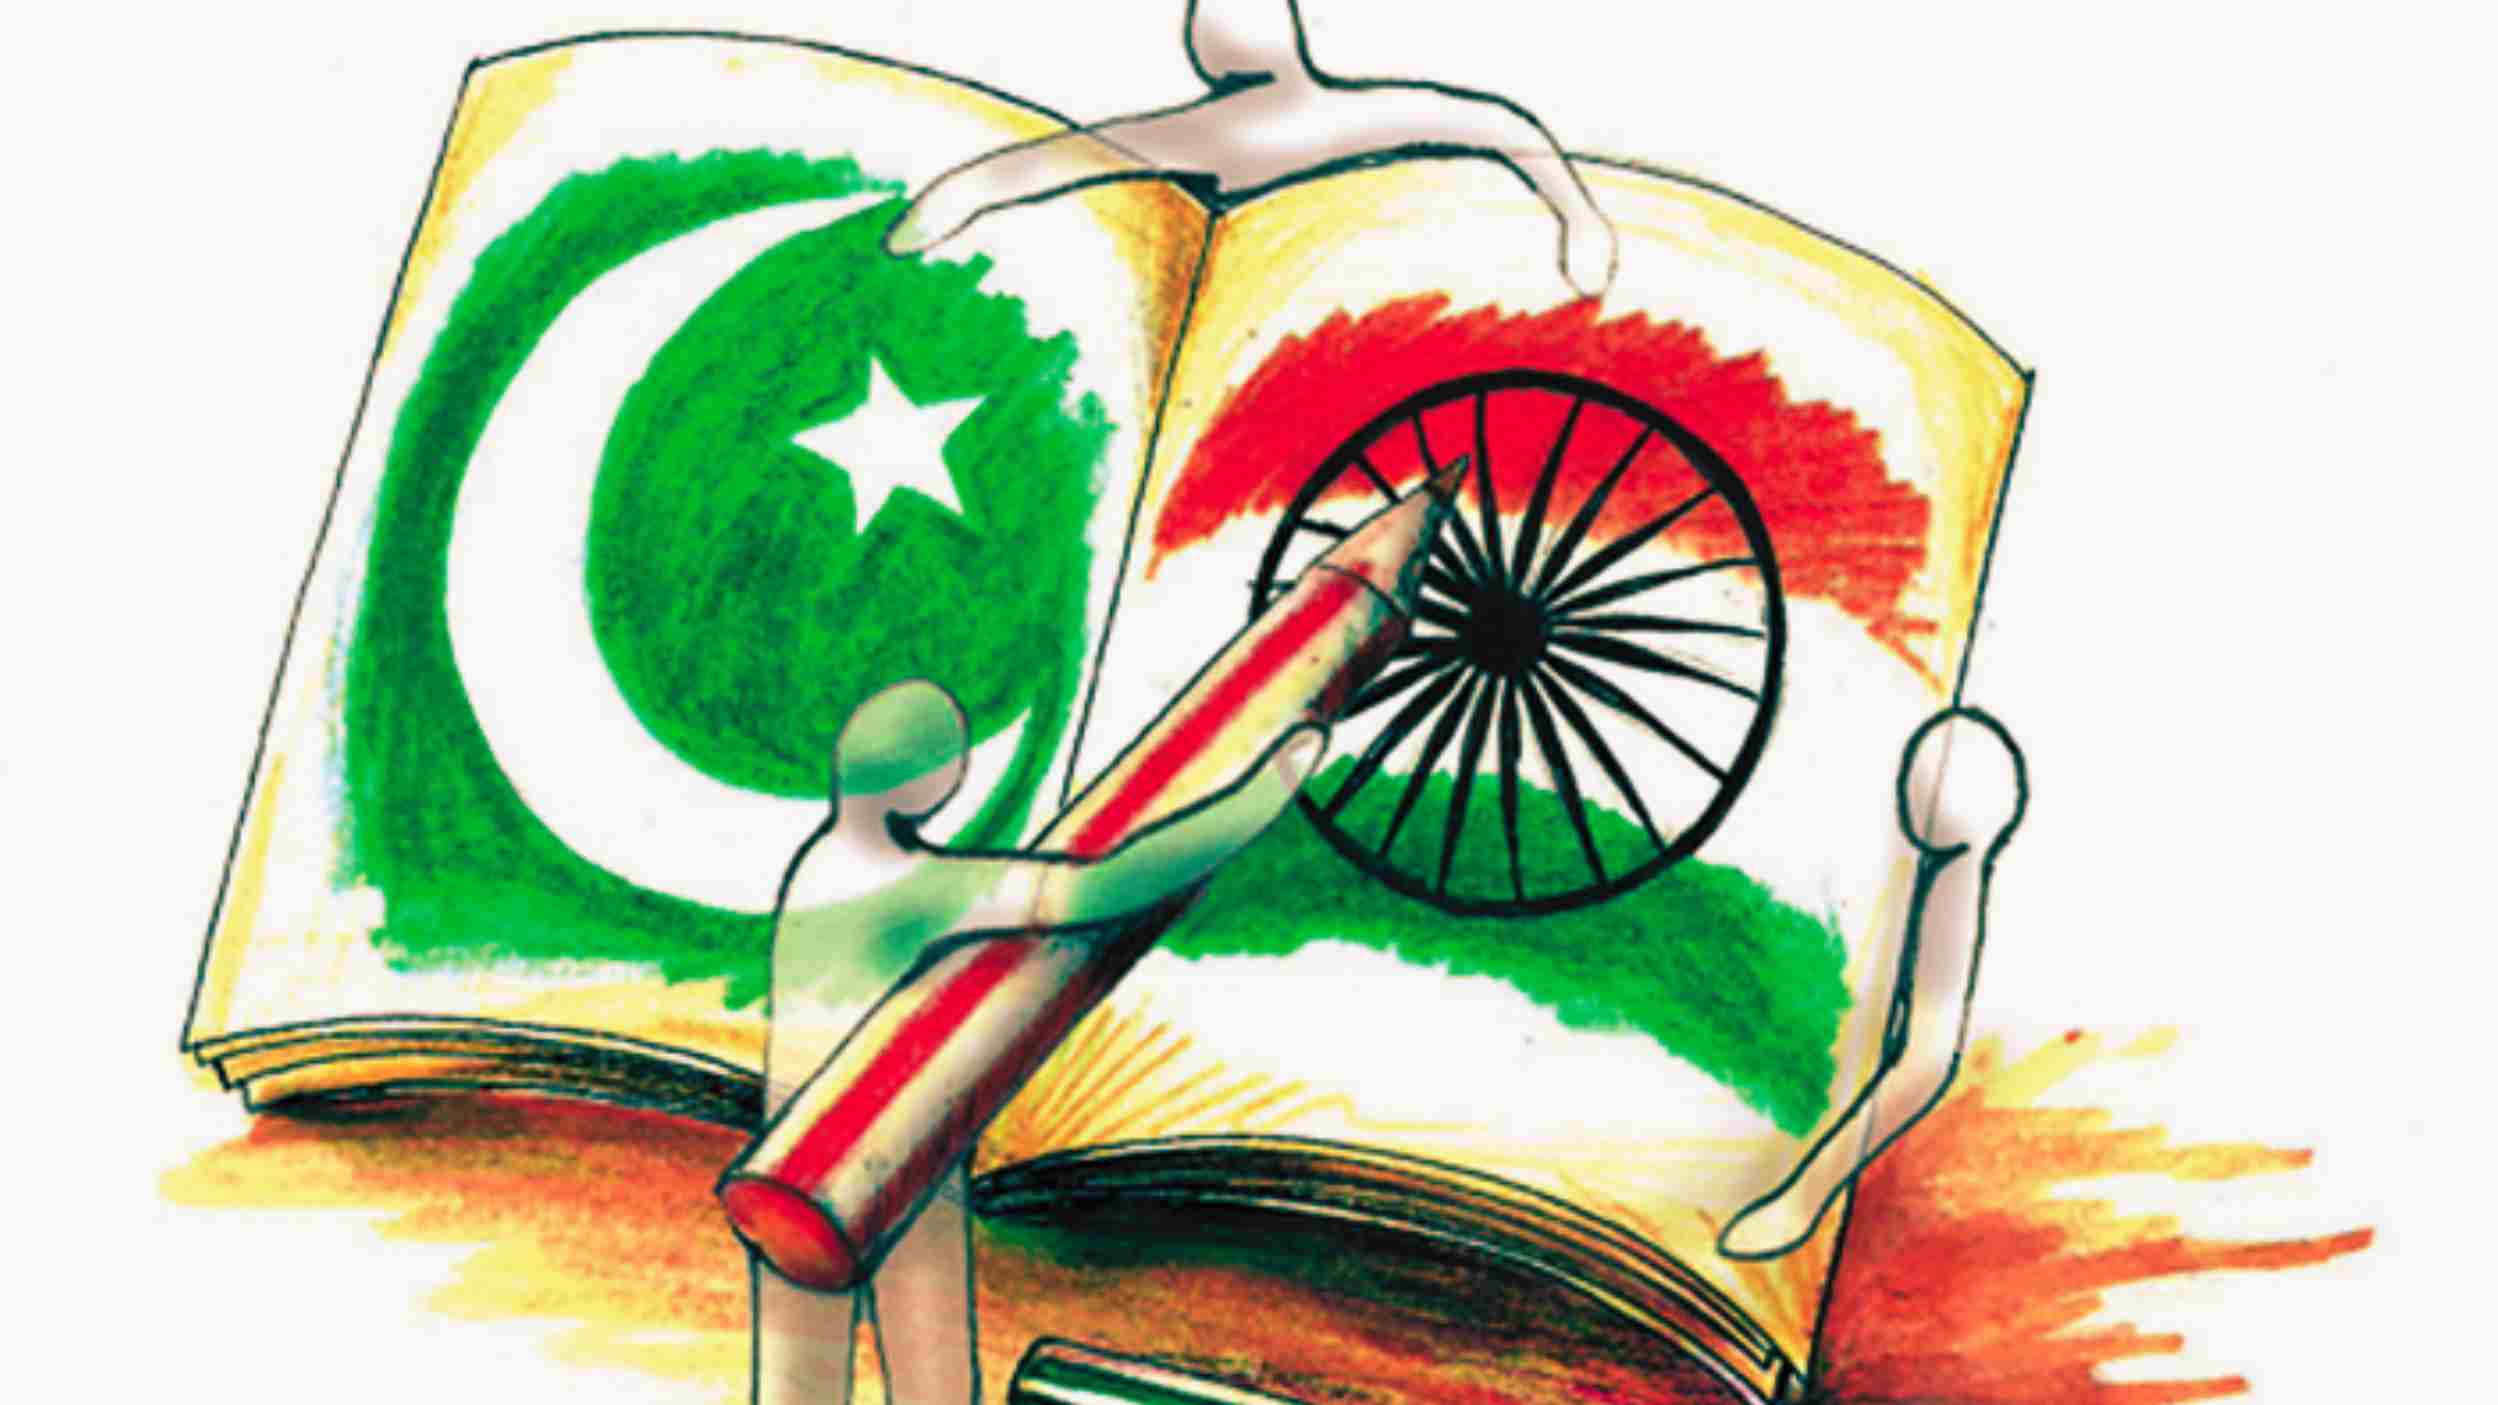 Indian textbooks, Pakistan history curriculum, Omissions, Untold story, Truth, Unveiling, Historical education, Cultural bias, Education reforms, Controversies, top stories,